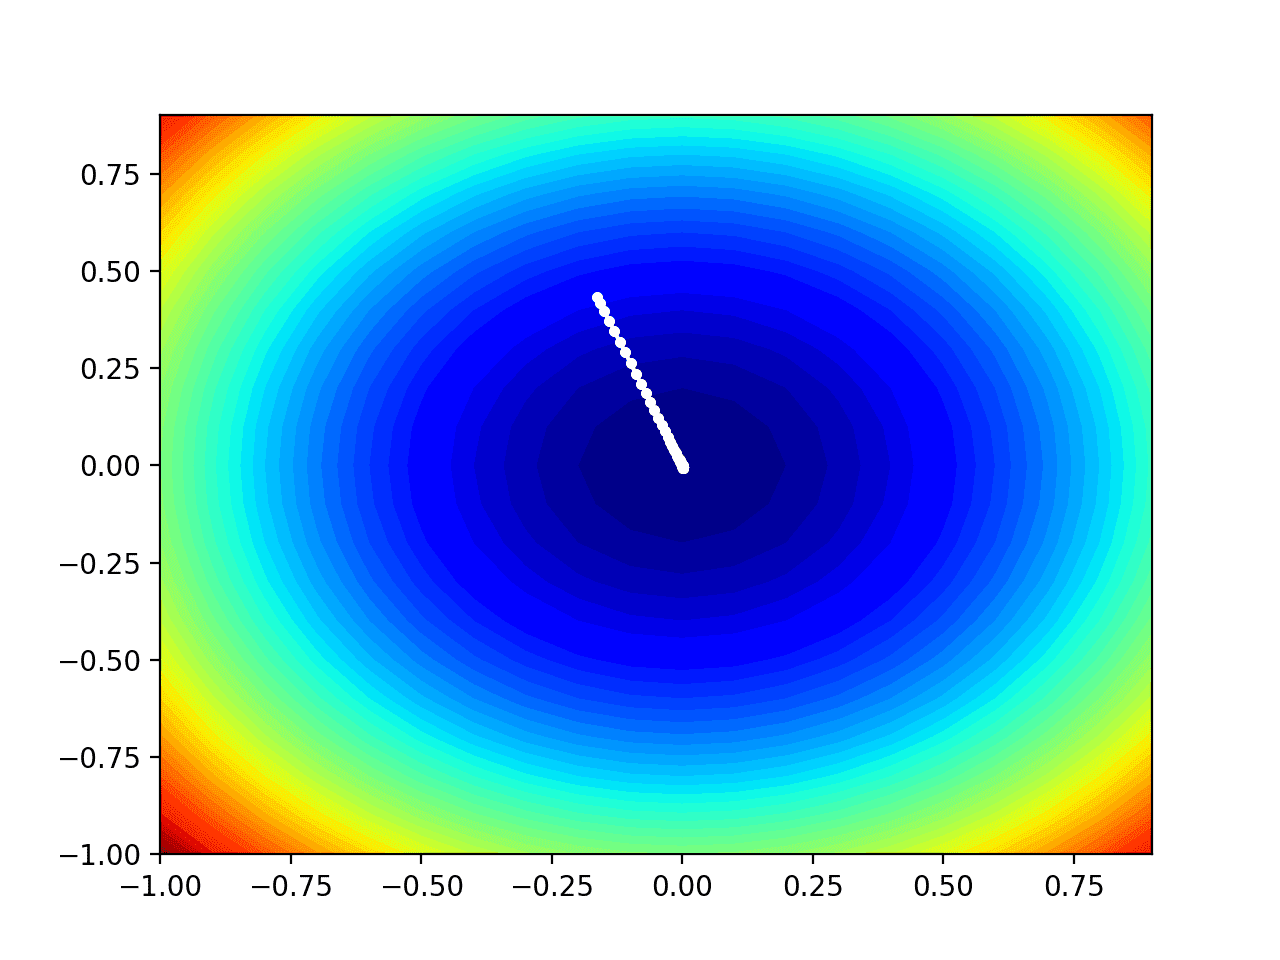 Gradient Descent With Nesterov Momentum From Scratch